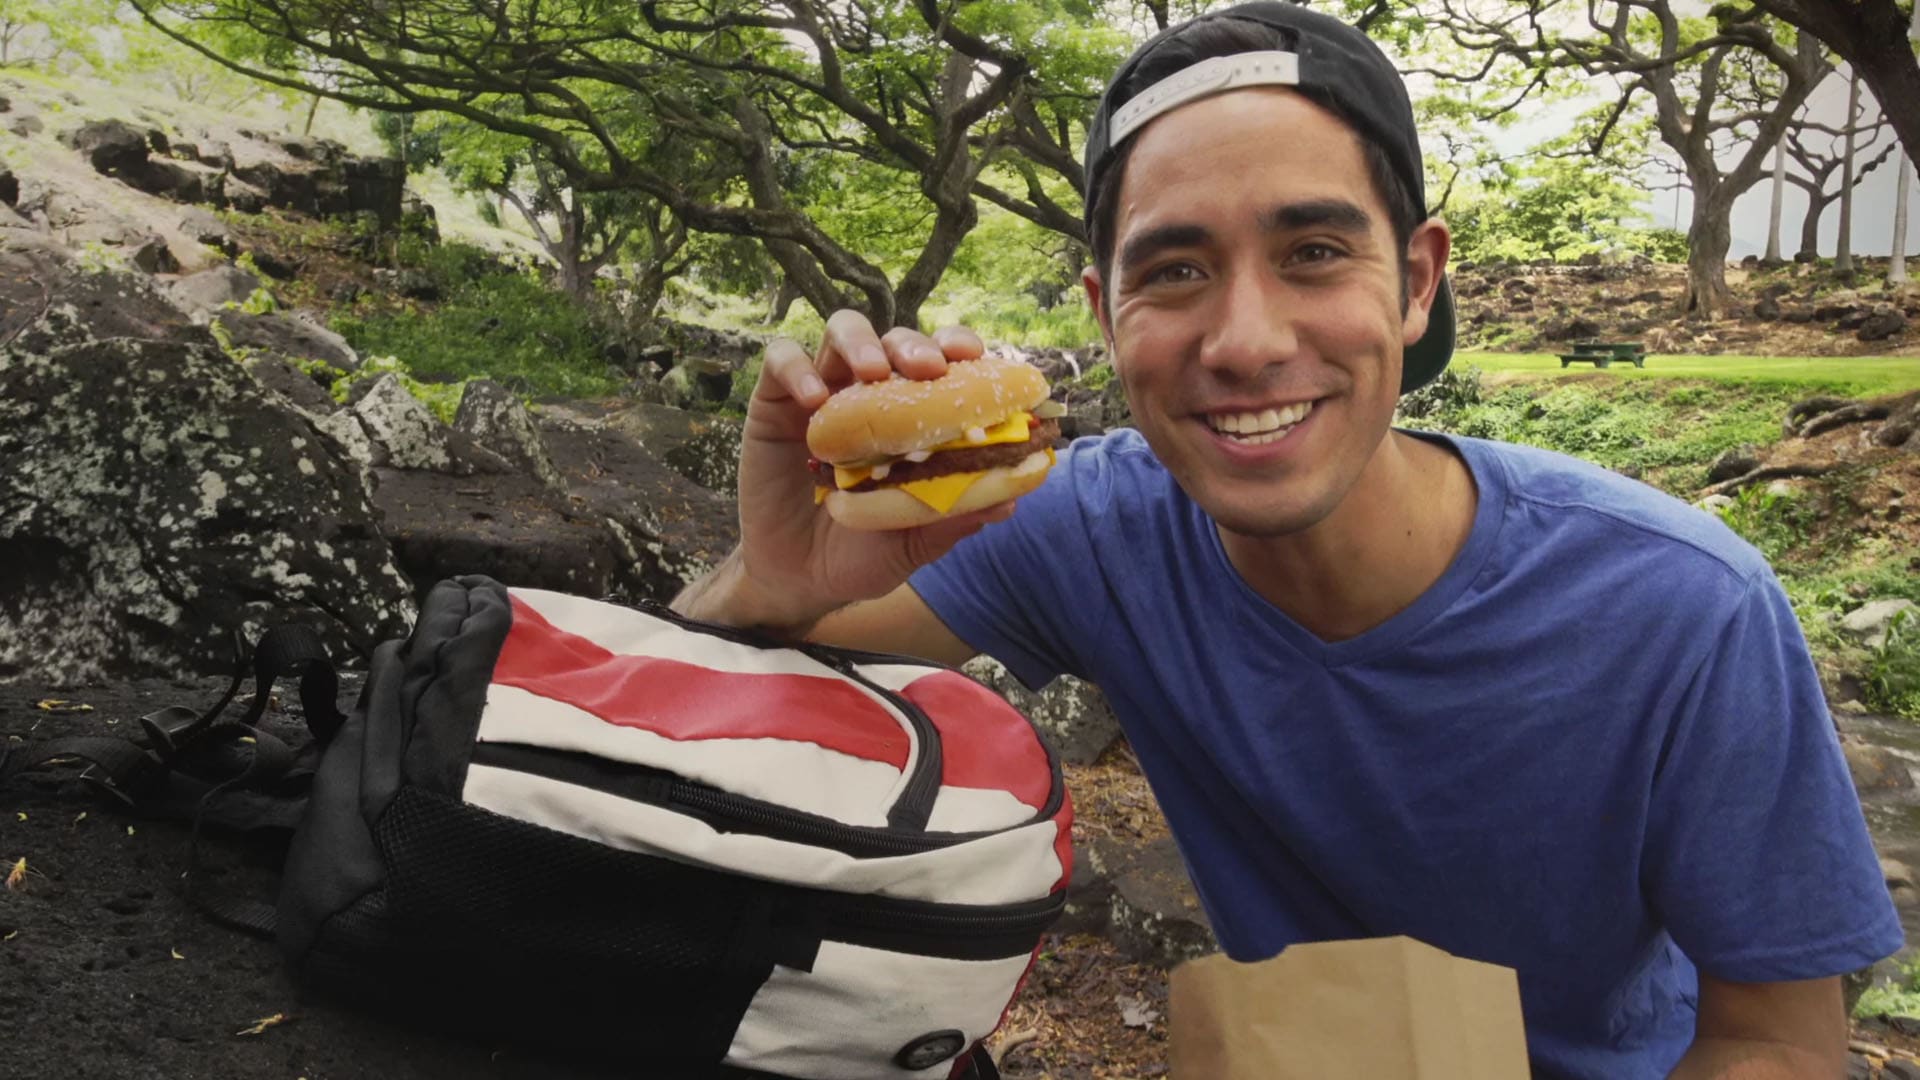 McDonald’s of Hawaii: Amazing Ingredients Campaign - Hiking with Zach King!